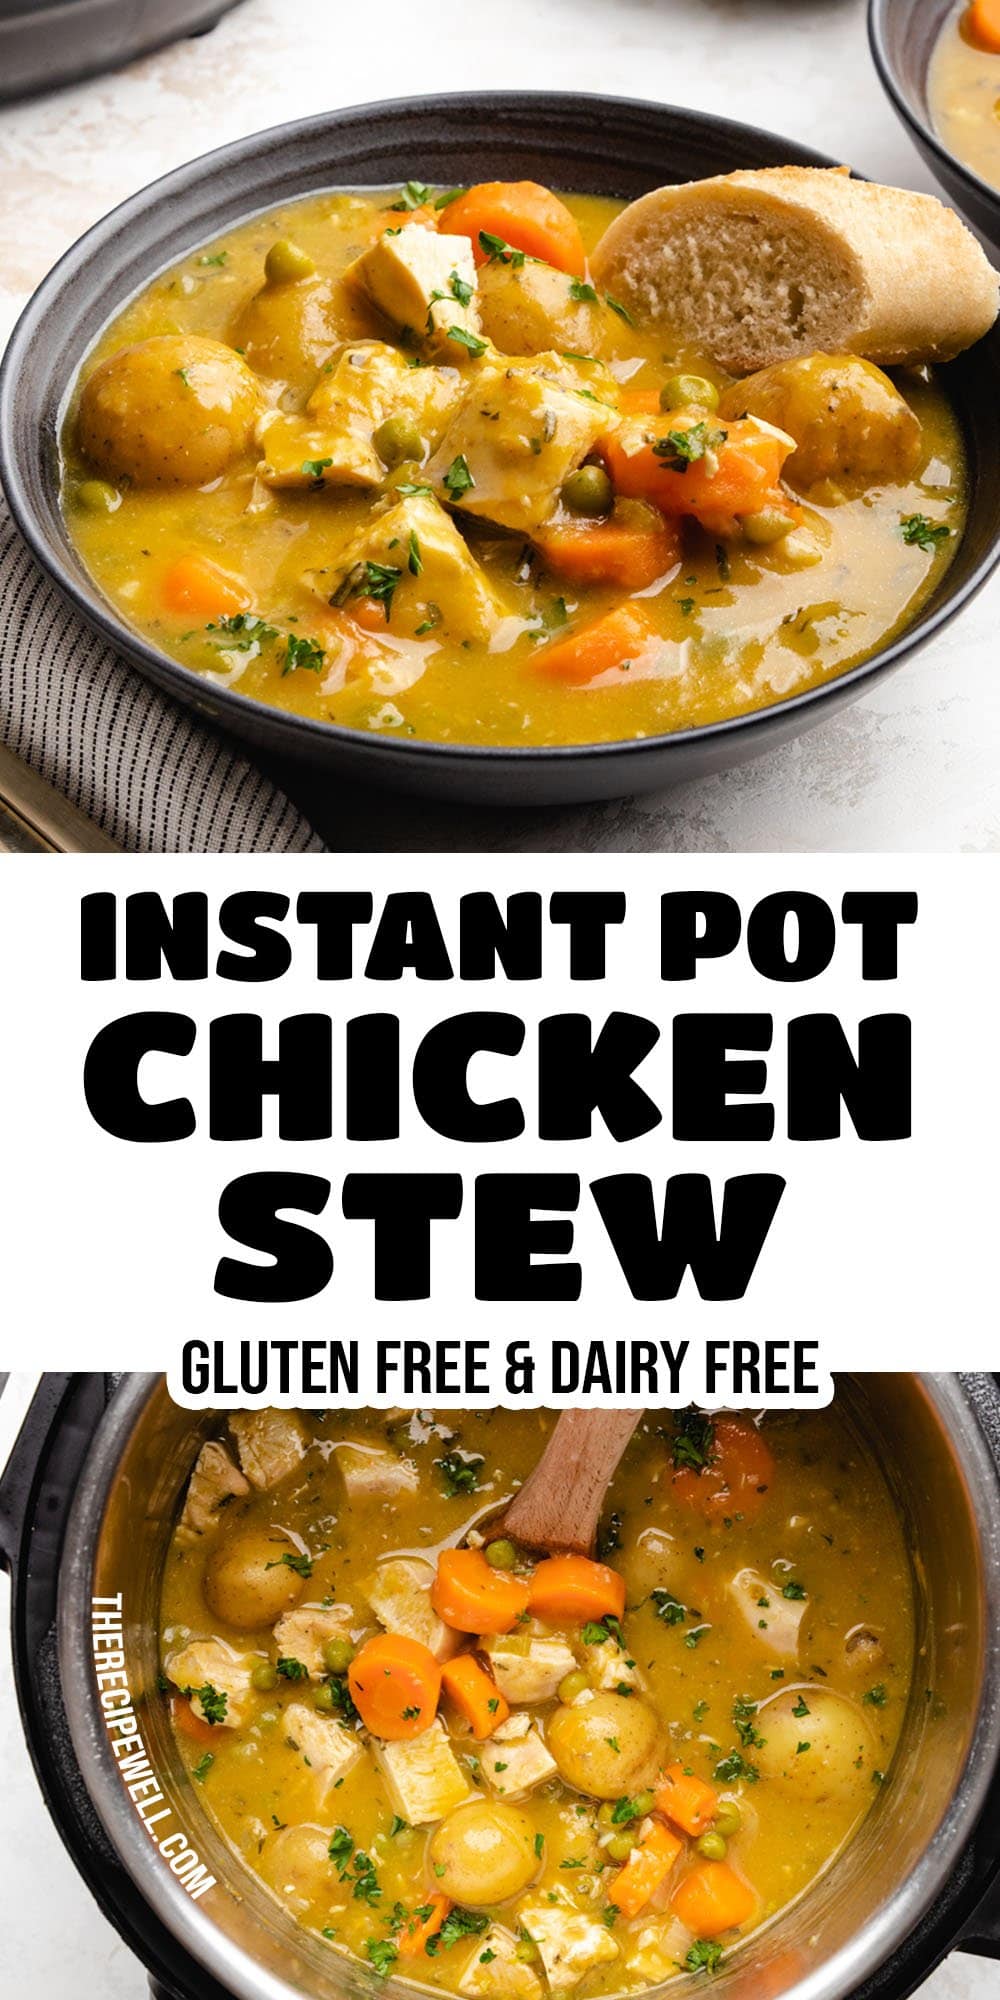 A Pinterest collage with two photos of the finished dish with text overlay "Instant Pot Chicken Stew, gluten free & dairy free". via @therecipewell